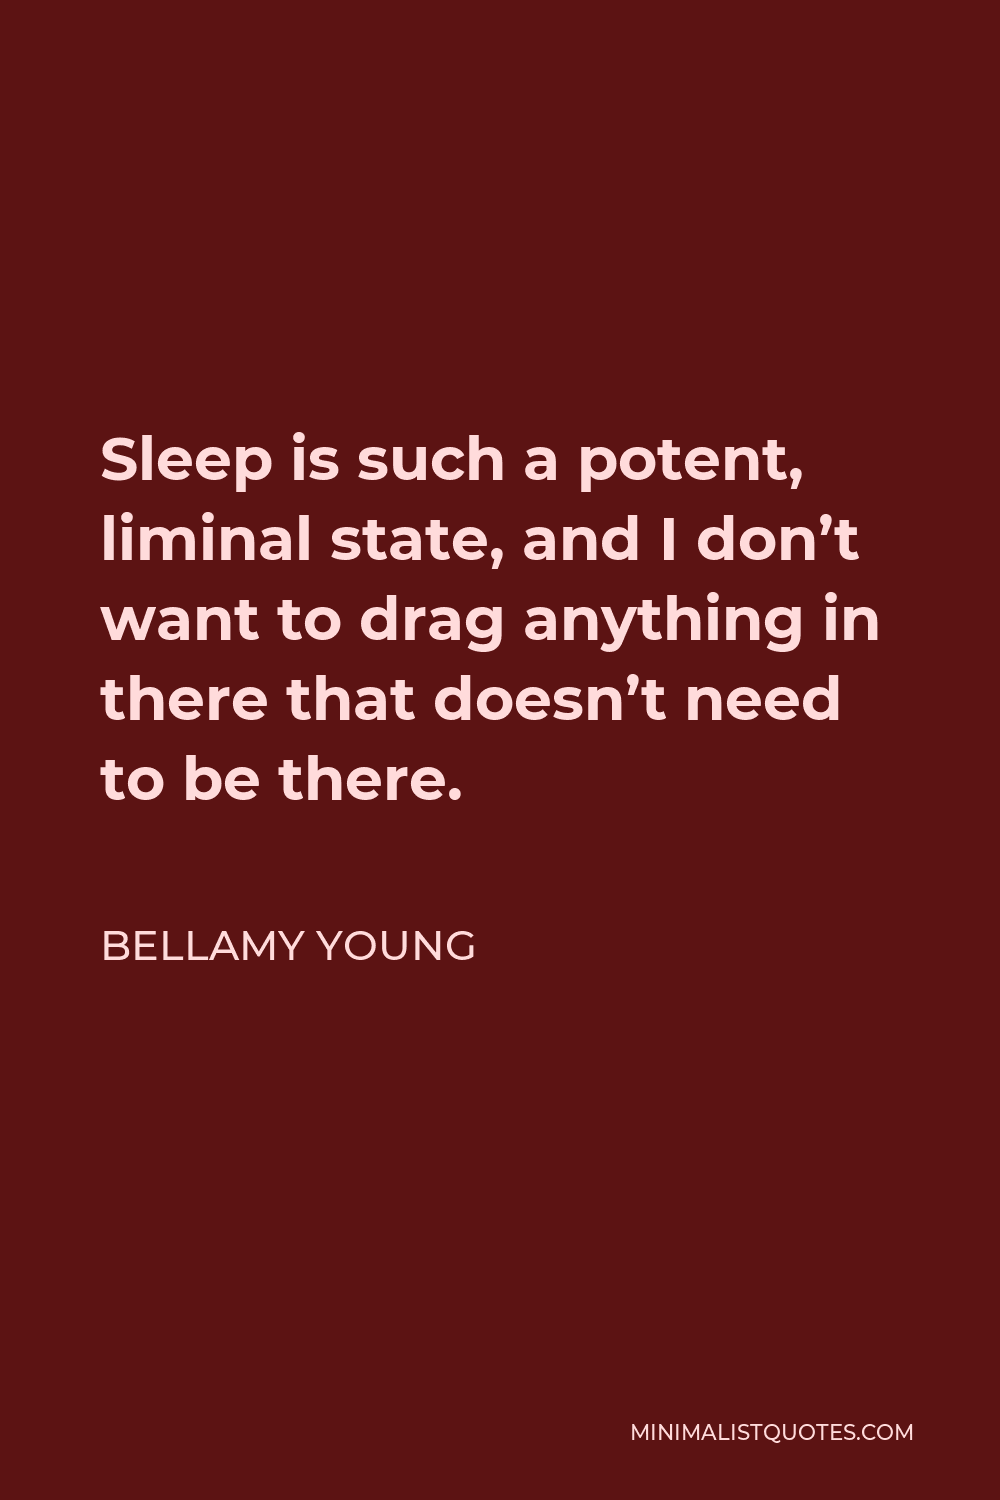 Bellamy Young Quote - Sleep is such a potent, liminal state, and I don’t want to drag anything in there that doesn’t need to be there.